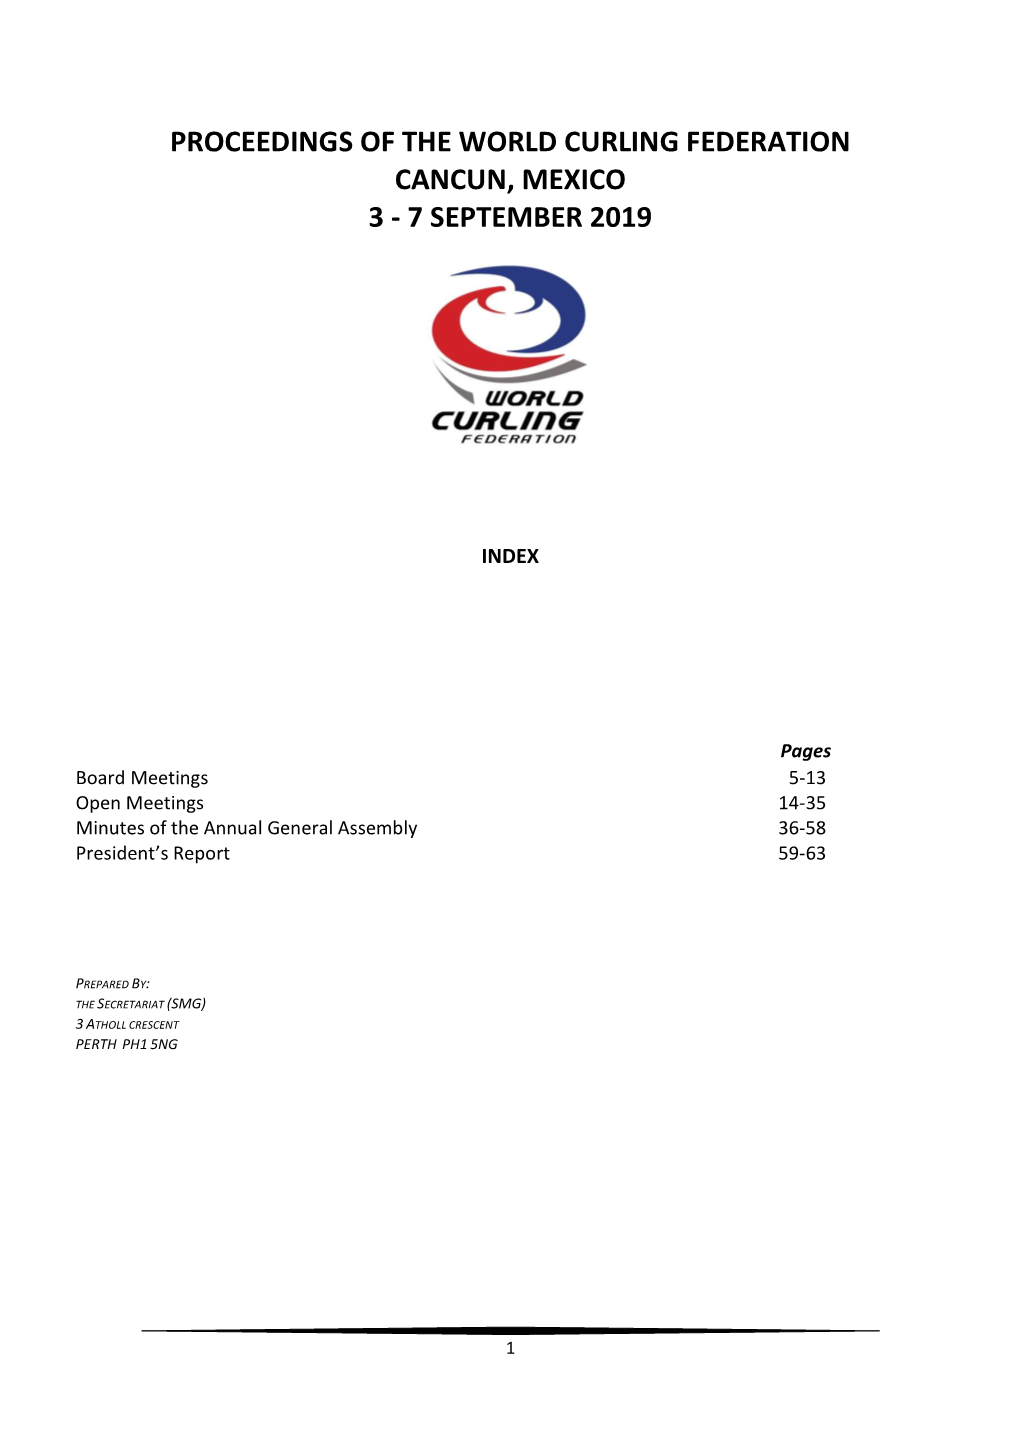 Proceedings of the World Curling Federation Cancun, Mexico 3 - 7 September 2019